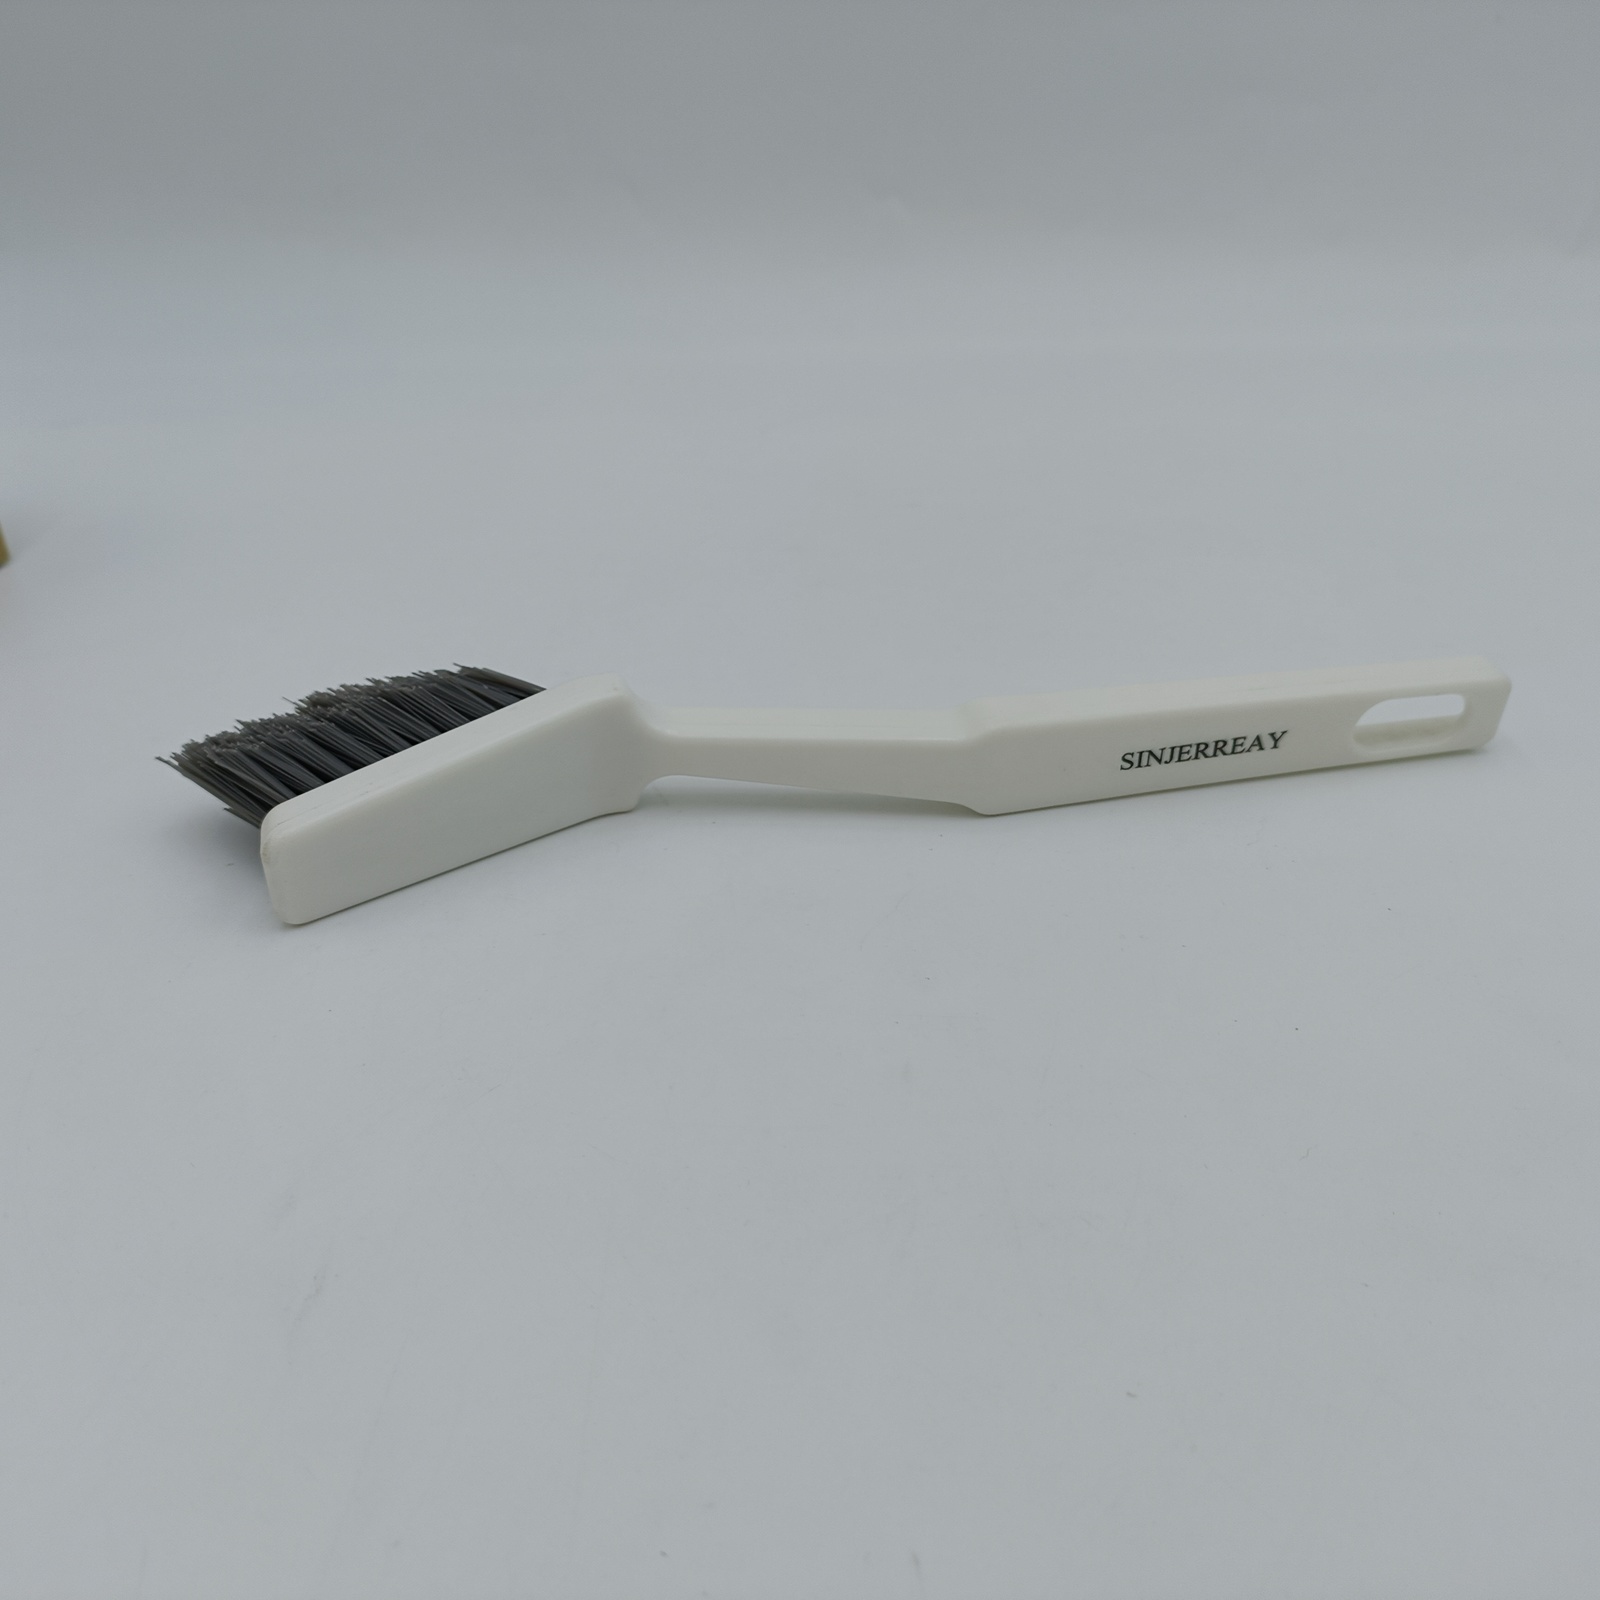 SINJERREAY rushes for cleaning tanks and containers Multi-Purpose Cleaning Brush - $12.99